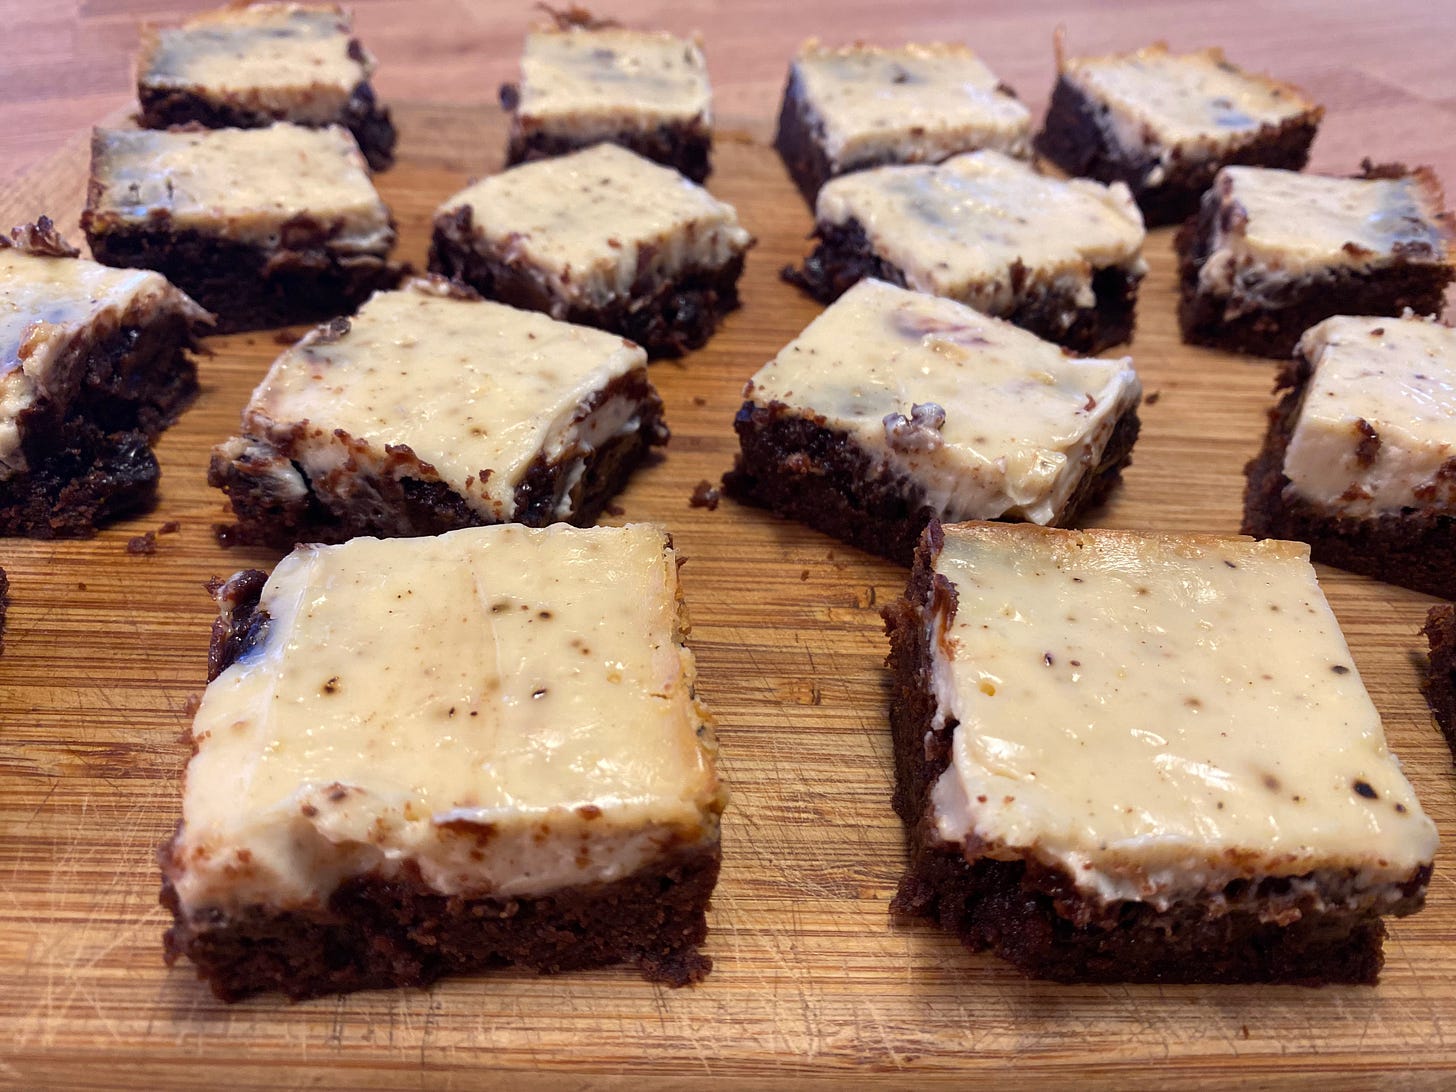 Several rows of brownies arranged on a wooden cutting board. They are cut into squares, and each one is topped with a shiny, creamy cheese layer.